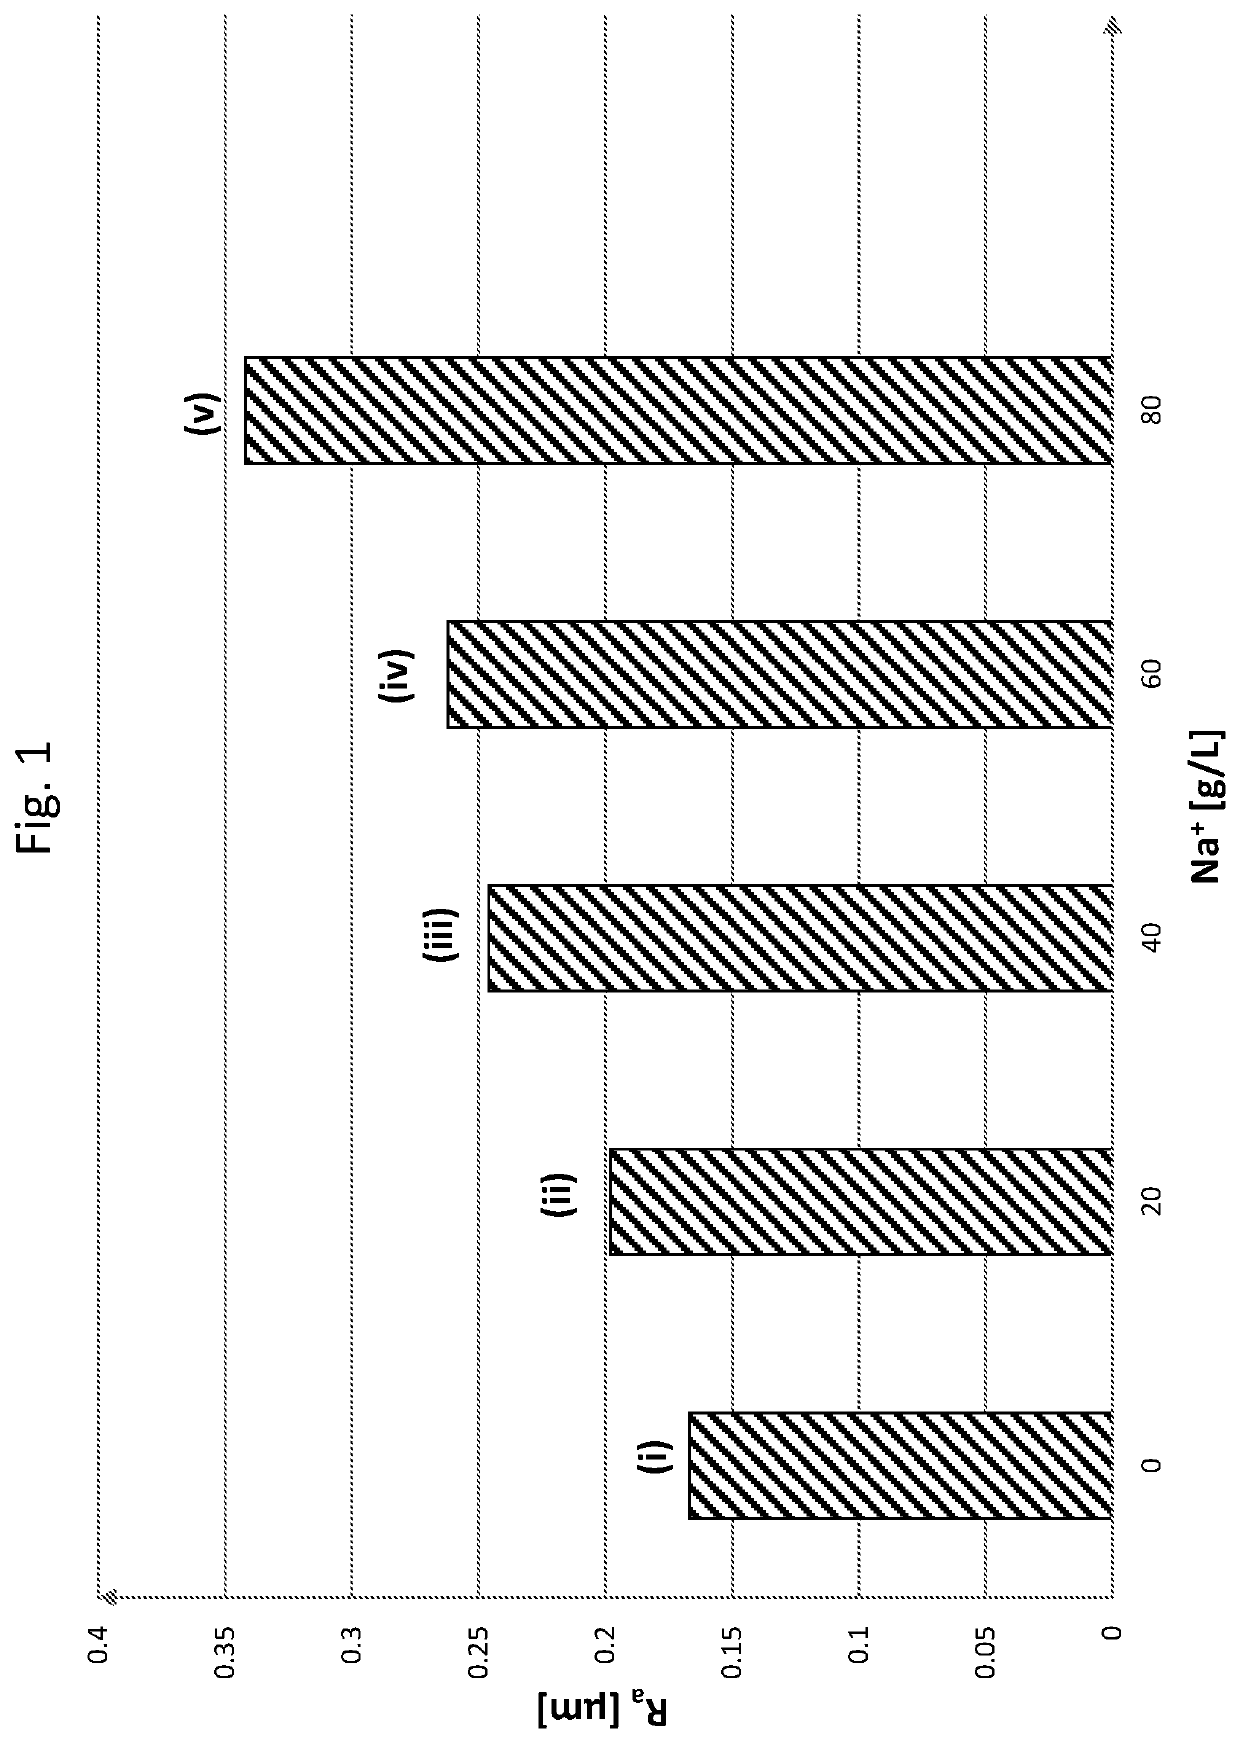 Controlled method for depositing a chromium or chromium alloy layer on at least one substrate